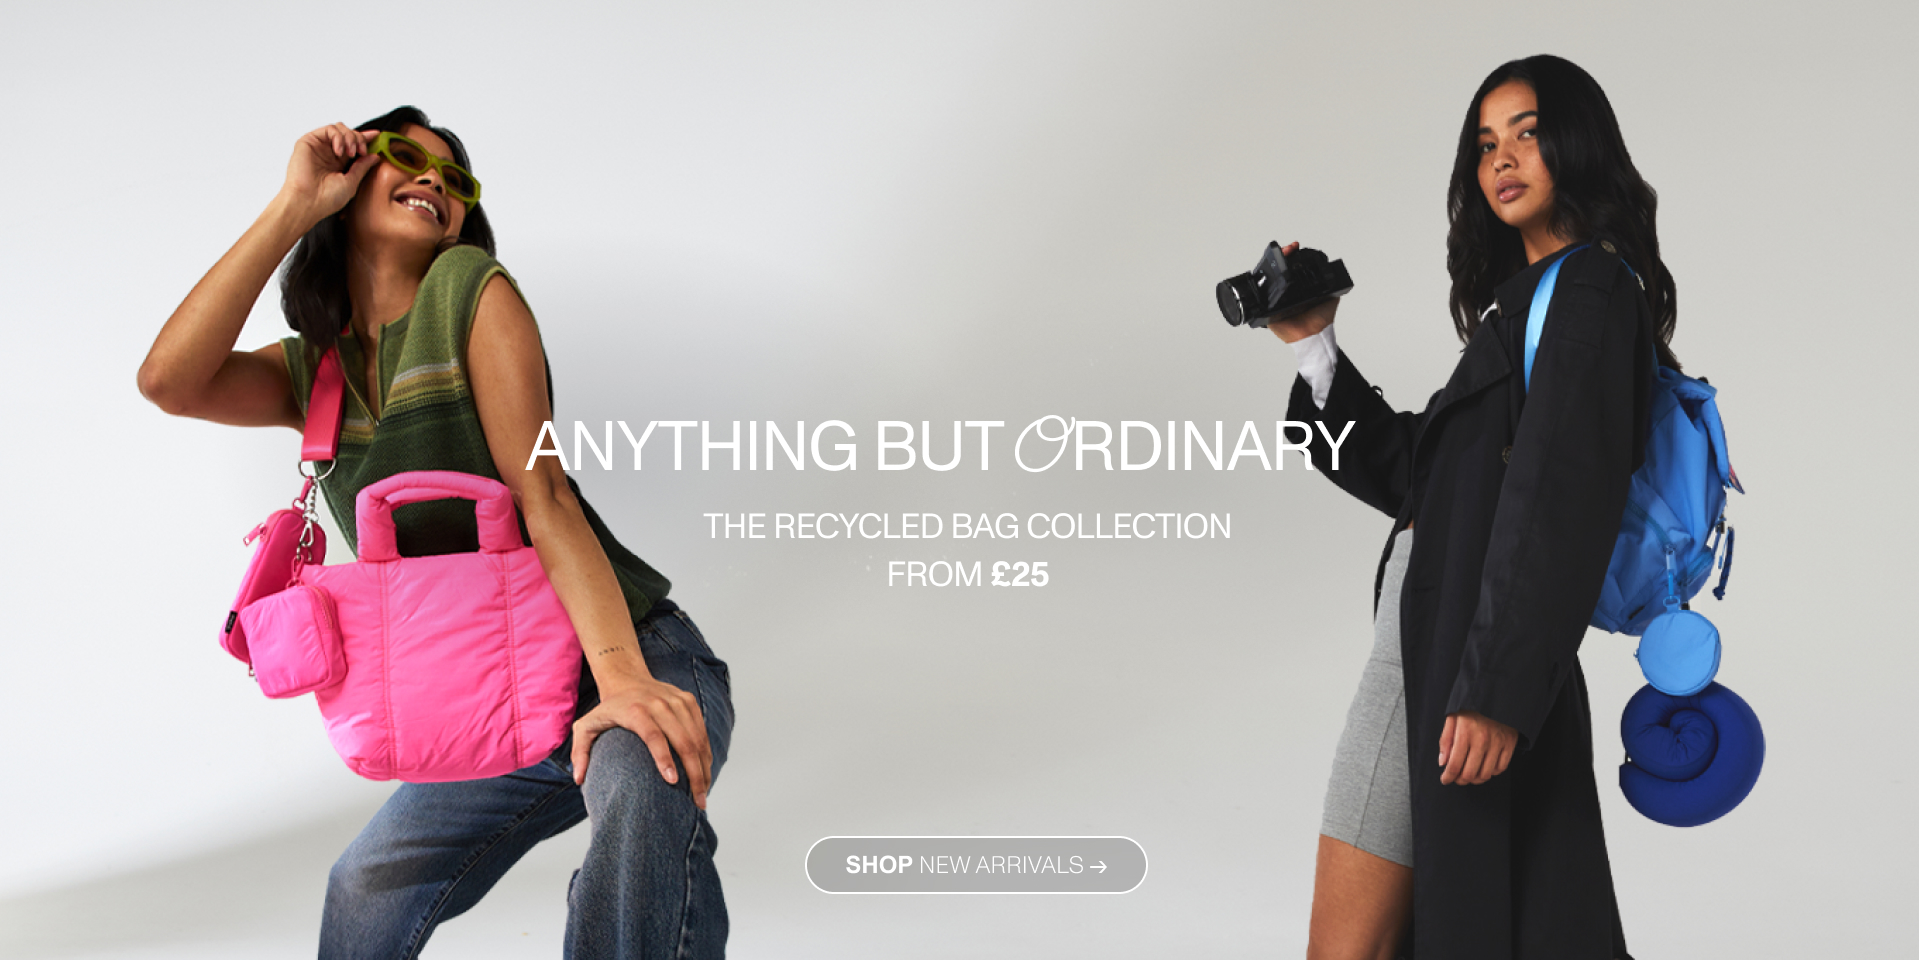 Anything But Ordinary. The Recycled Bag Collection From £25. Shop New Arrivals.